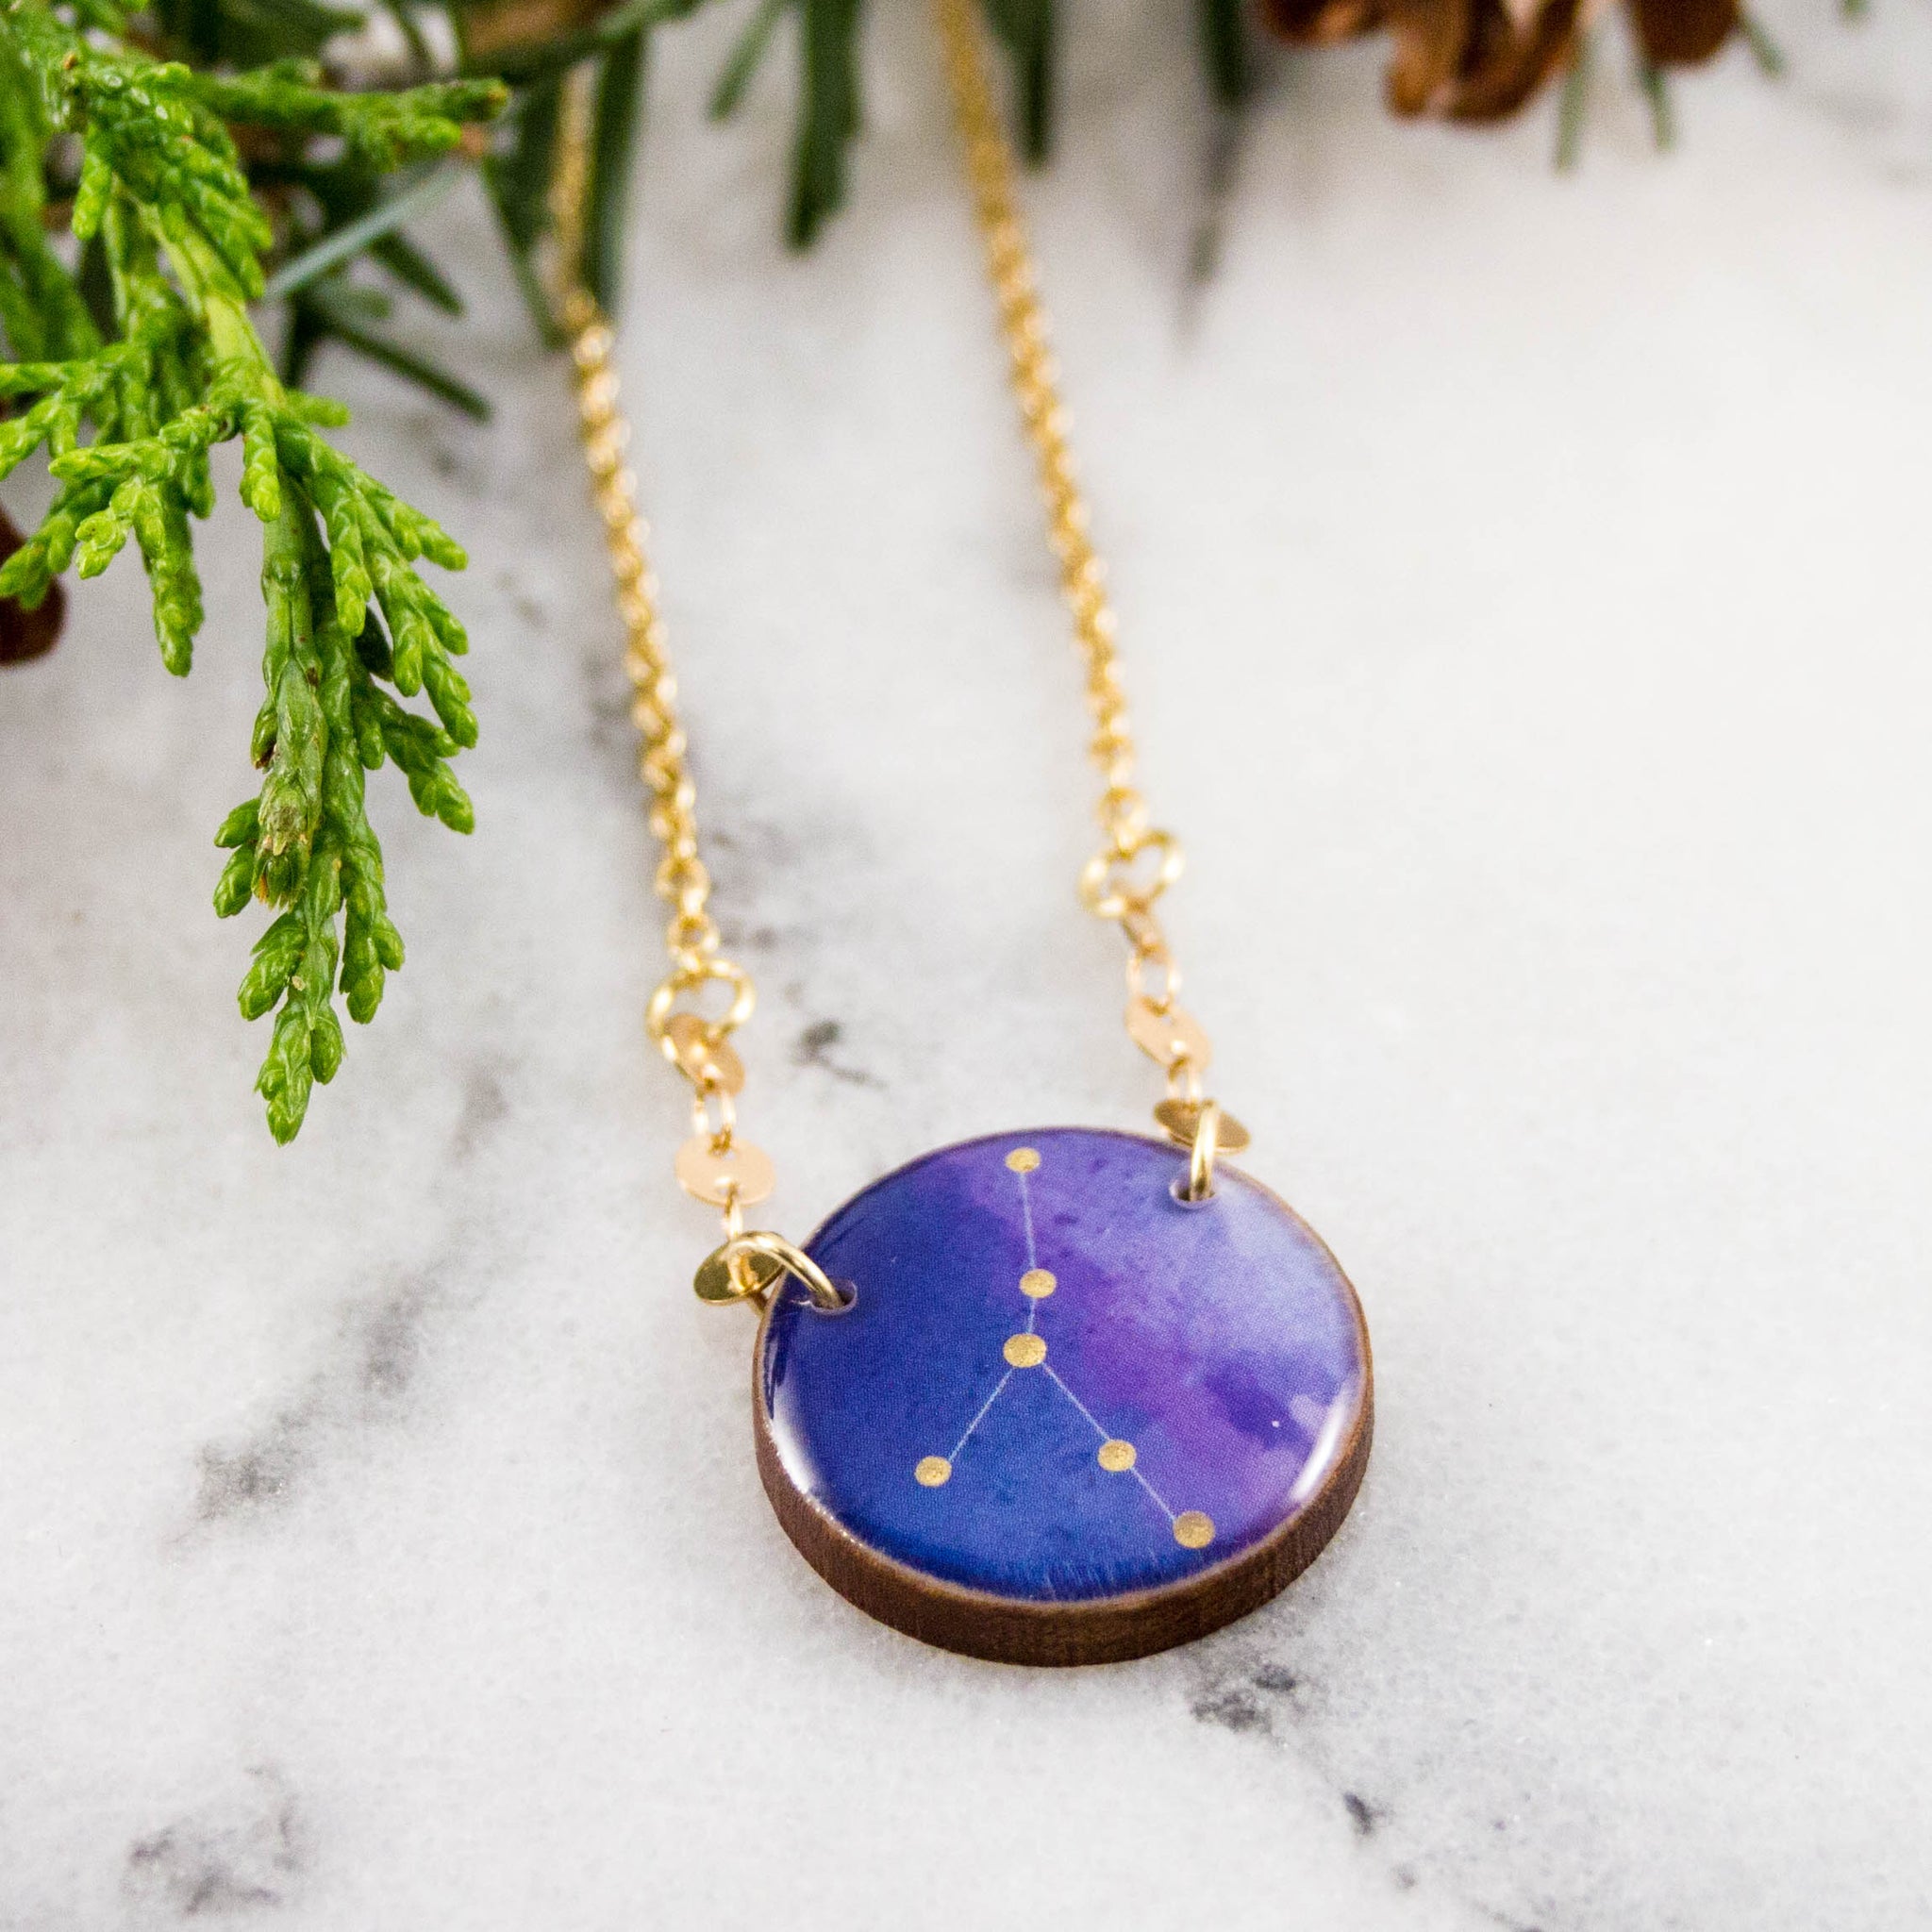 Cancer Handpainted Constellation Necklace